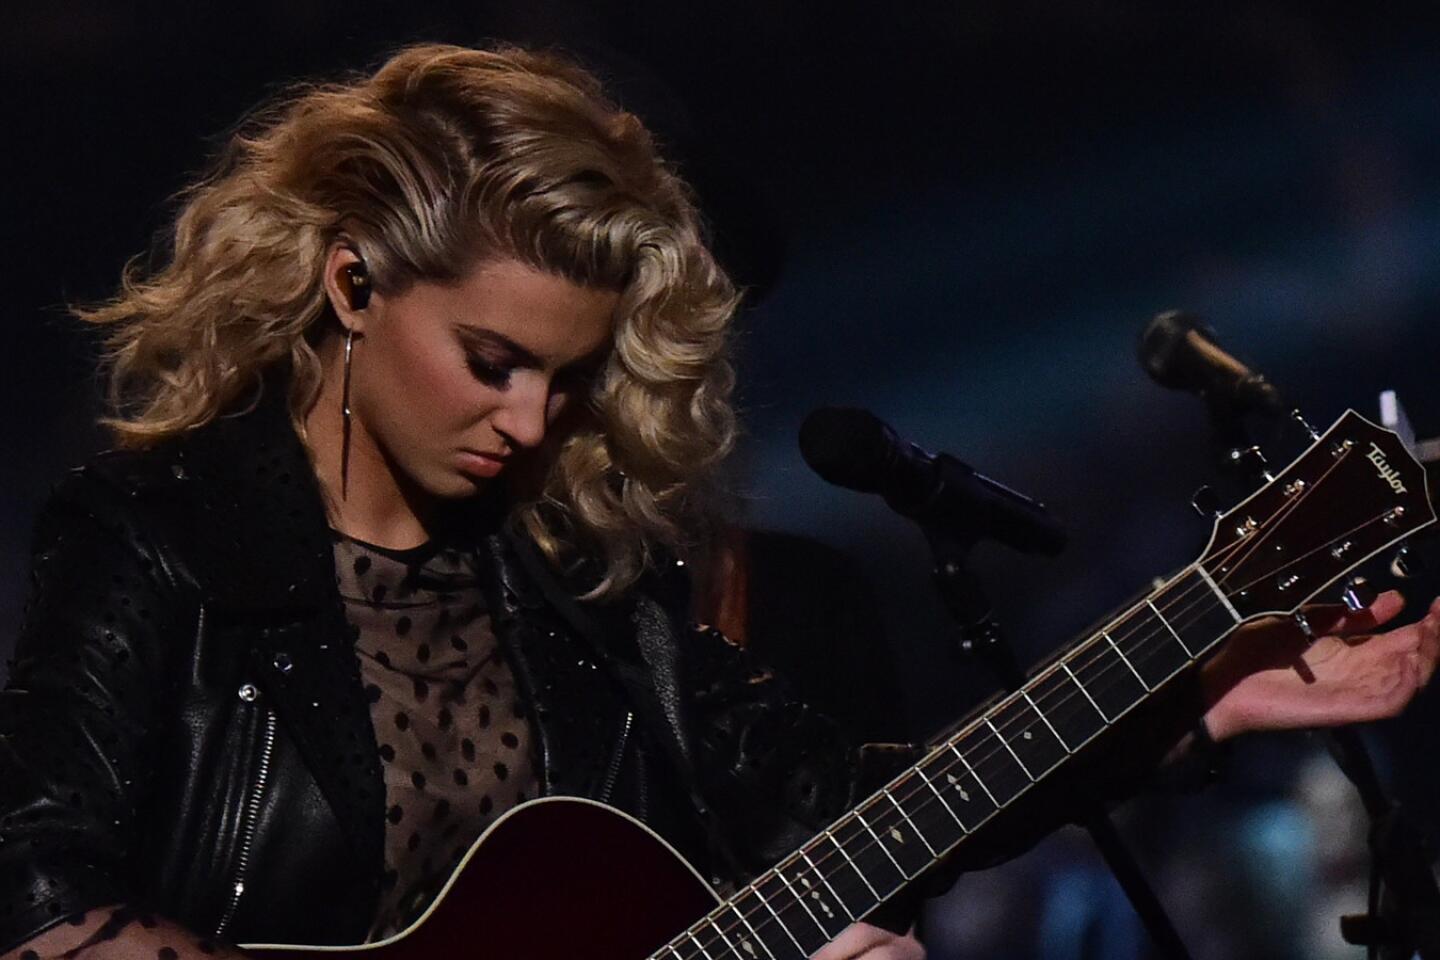 Singer Tori Kelly sings a rendition of her song "Hollow" with James Bay.